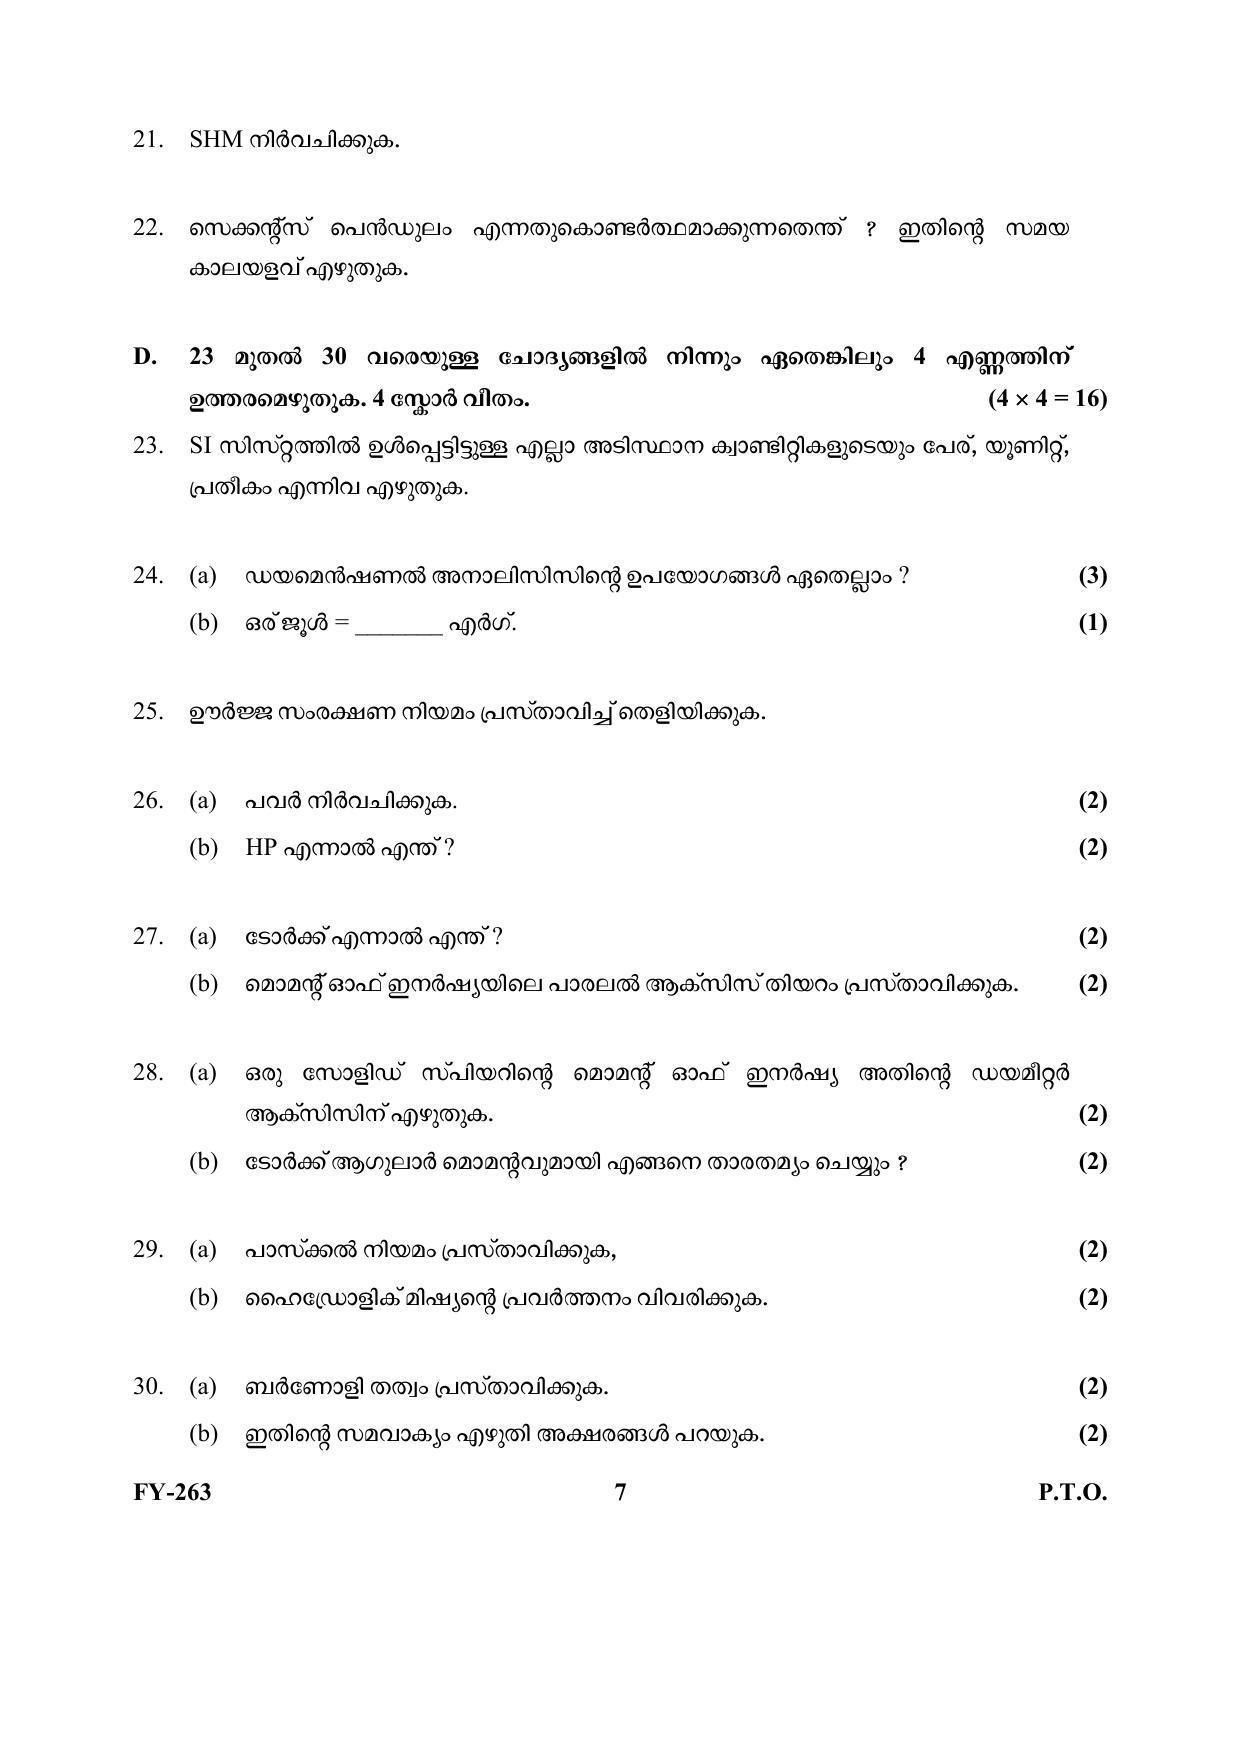 Kerala Plus One (Class 11th) Physics (Hearing Impaired) Question Paper 2021 - Page 7